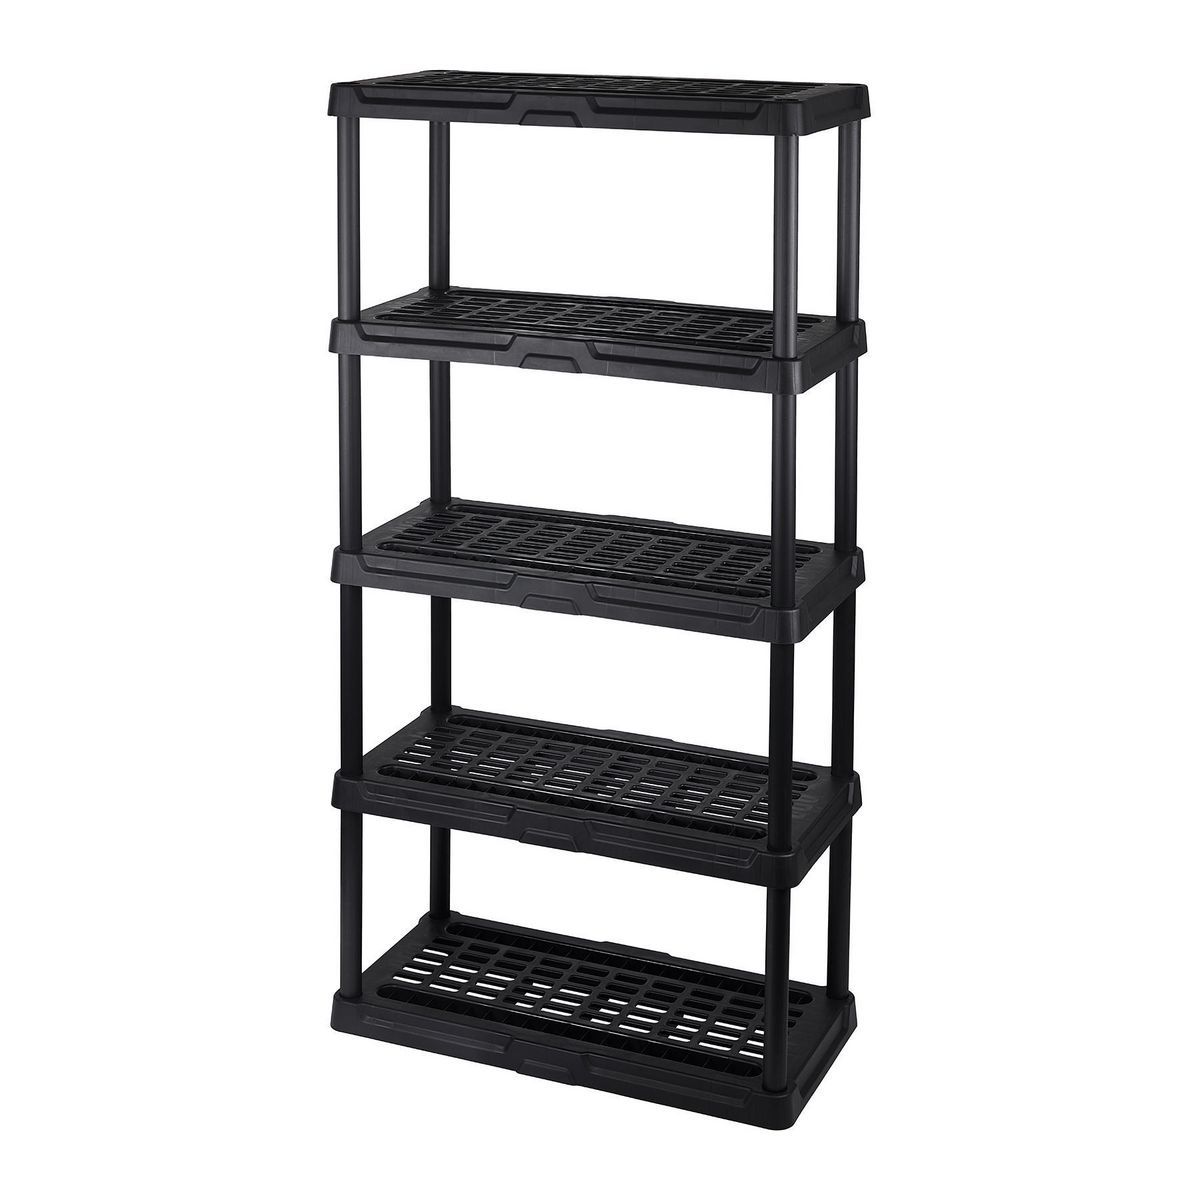 5 Tier Storage Rack on Sale At Harbor Freight Tools